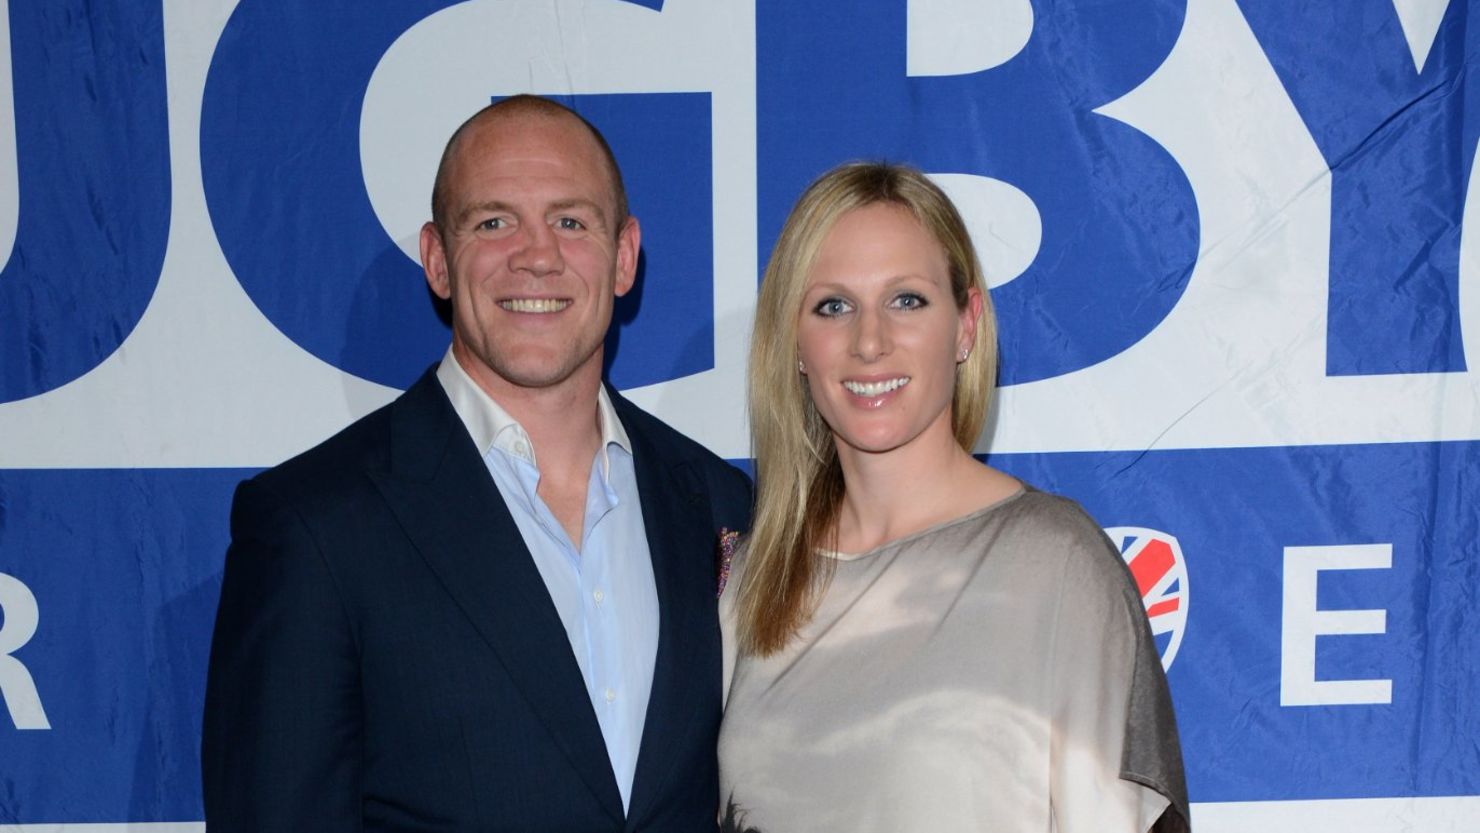 Zara Tindall (pictured with husband Mike) is a granddaughter of Queen Elizabeth II.